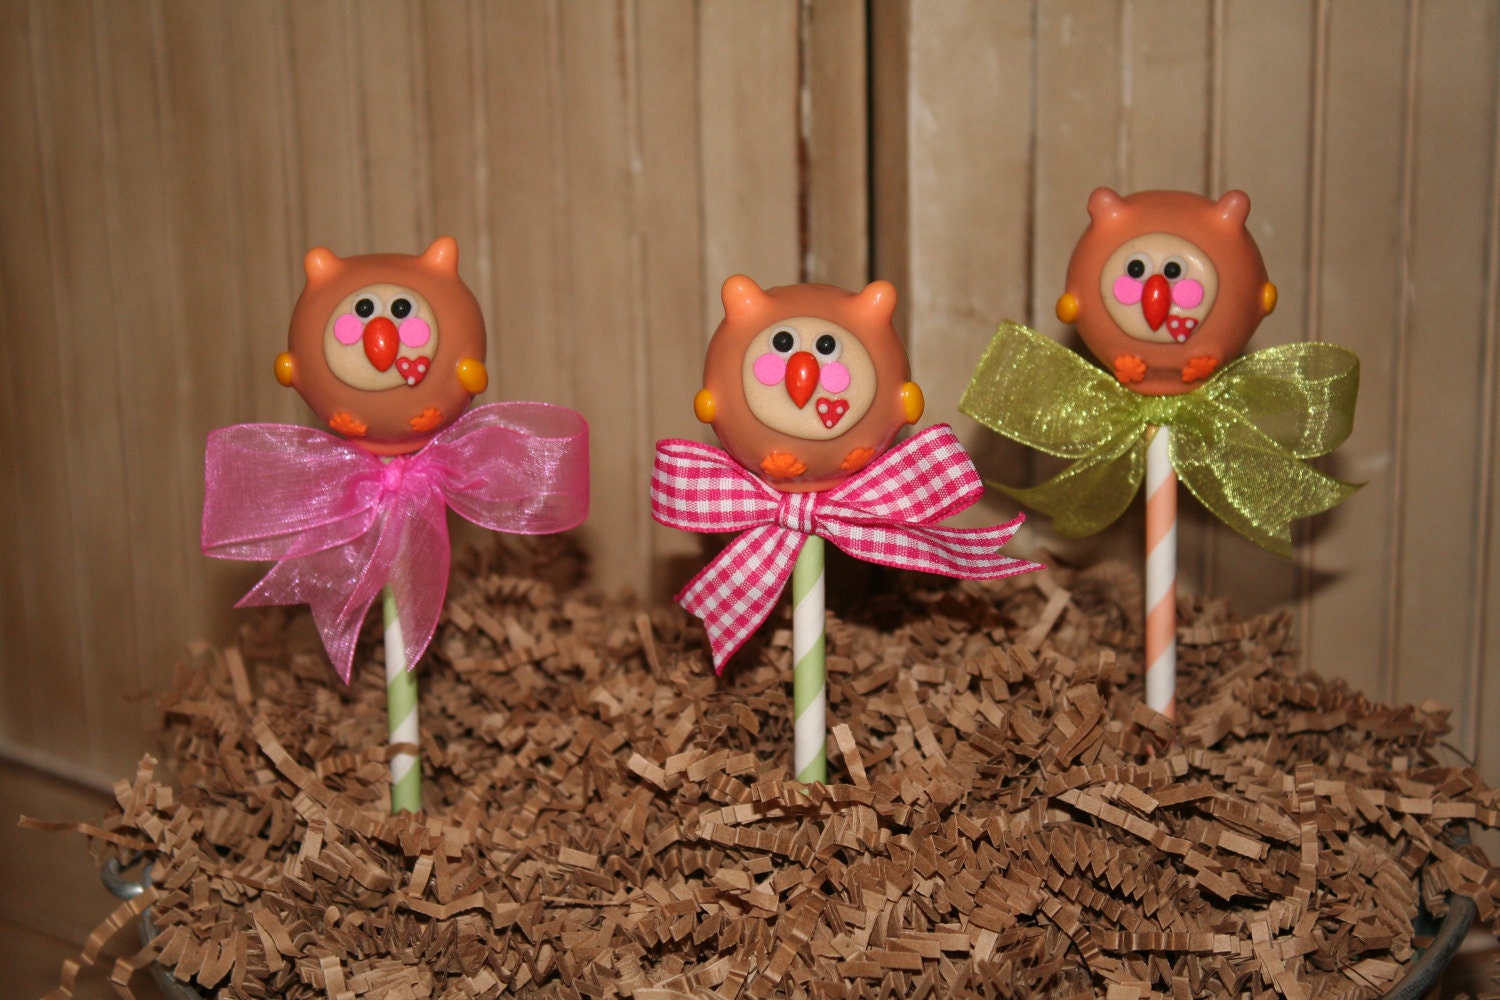 Mom's Killer Cakes & Cookies Original Design In Cake PoP ArT Happi Happy Tree Owl Cake Pops FIRST On Etsy Southern Living Featured Shop